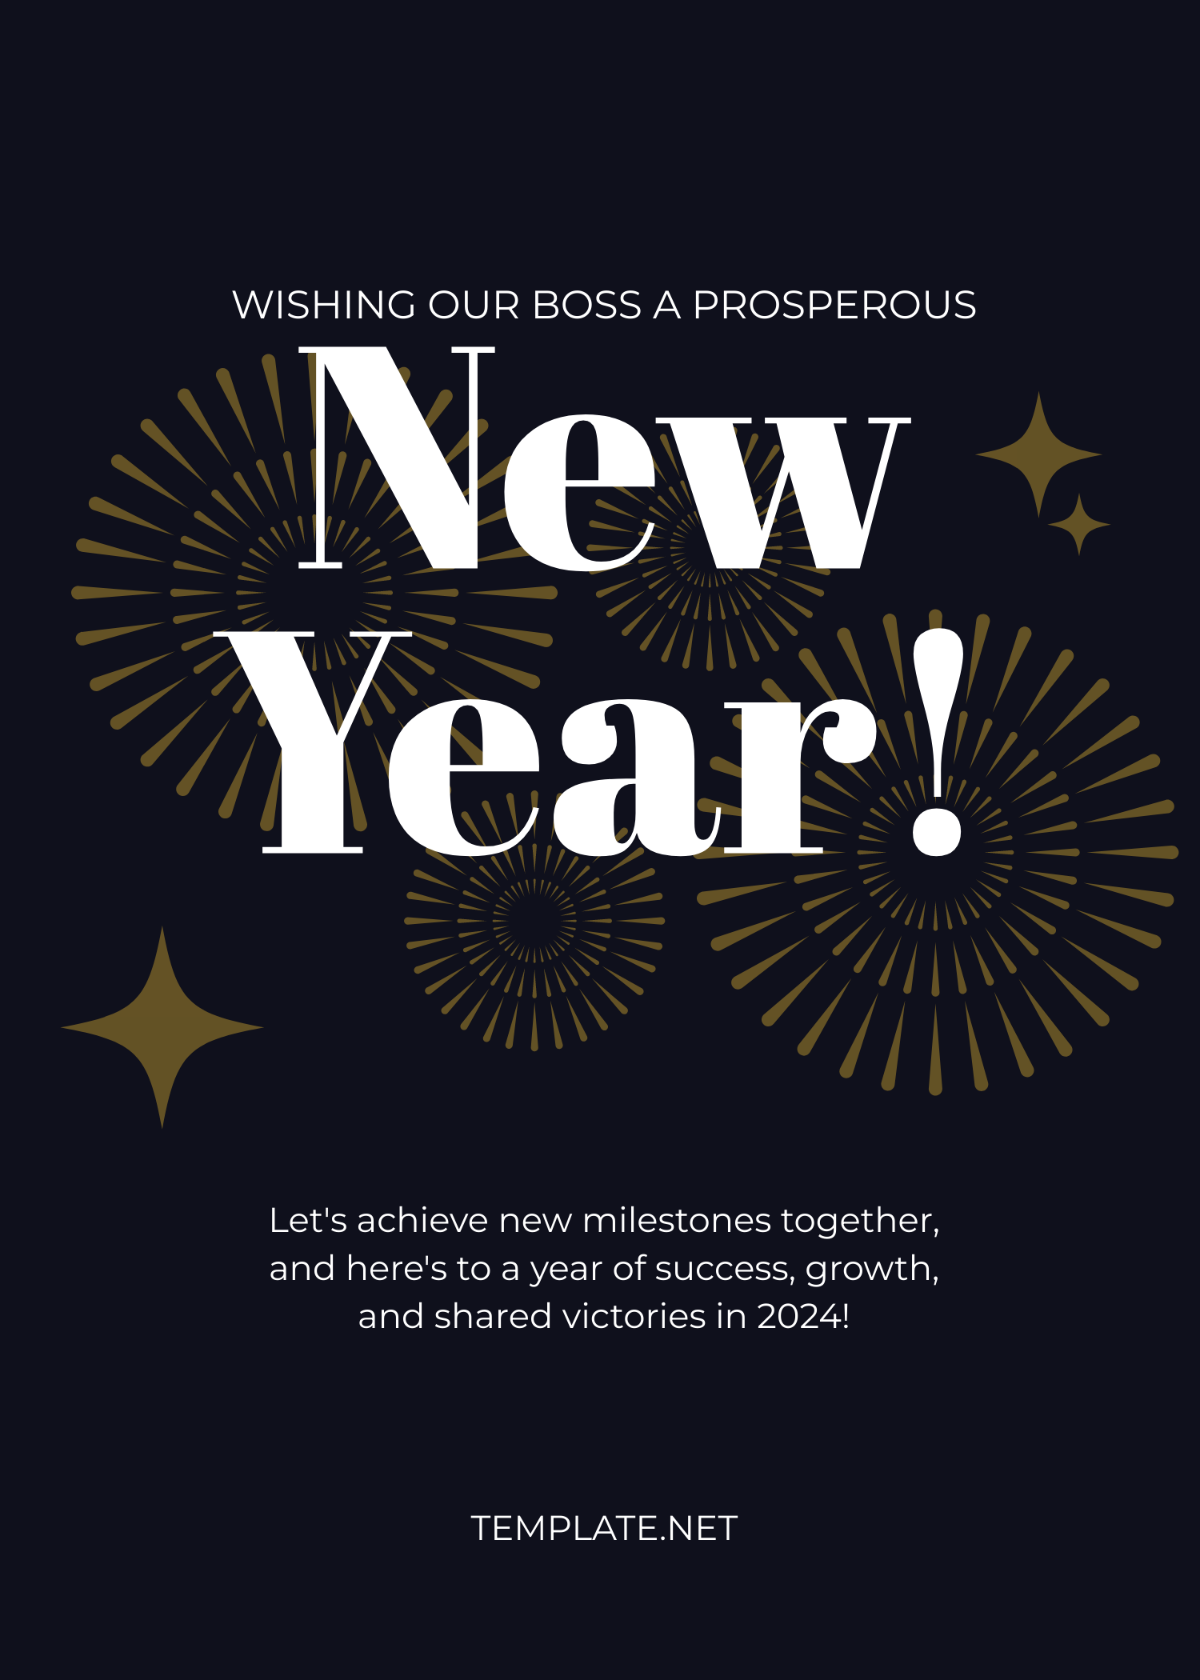 New Year Greeting for Boss Template